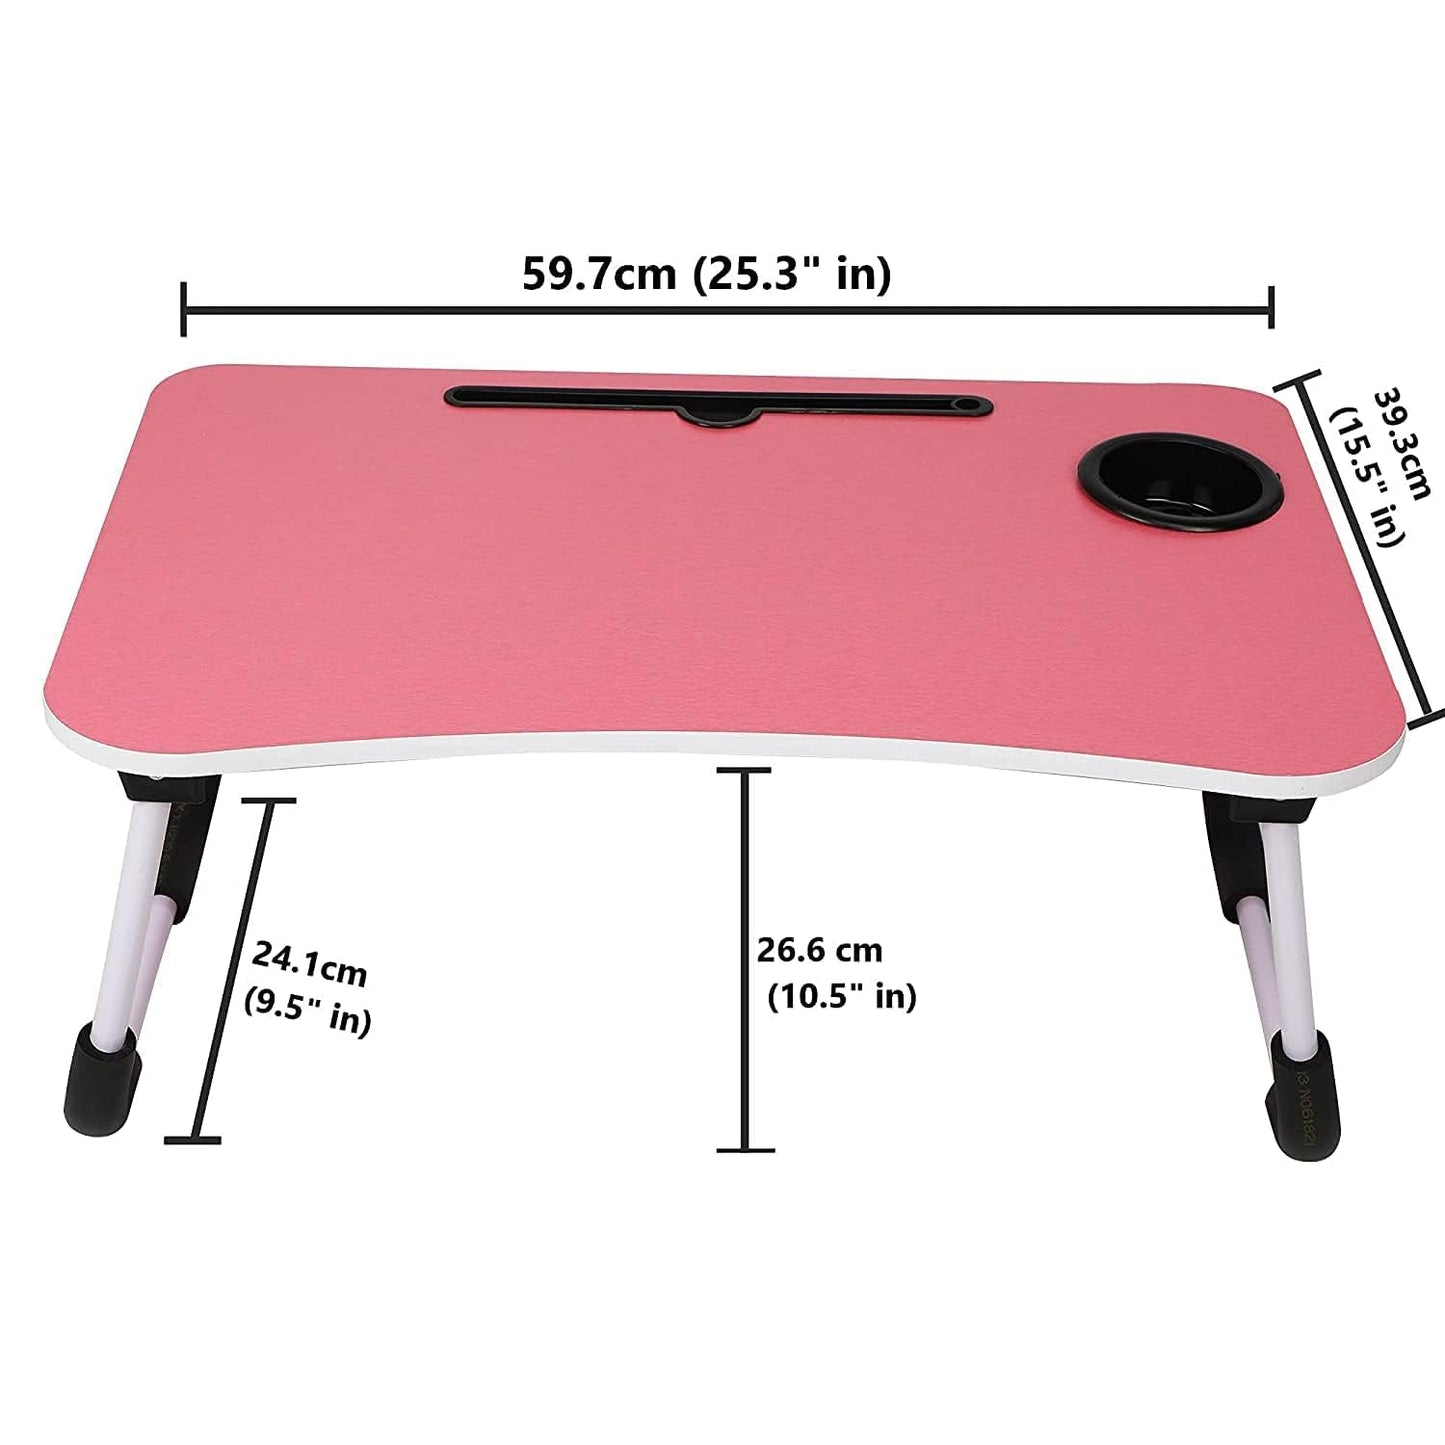 Multi-Purpose Laptop Desk for Study and Reading with Foldable Non-Slip Legs Reading Table Tray, Laptop Table ,Laptop Stands, Laptop Desk, Foldable Study Laptop Table (PINK)